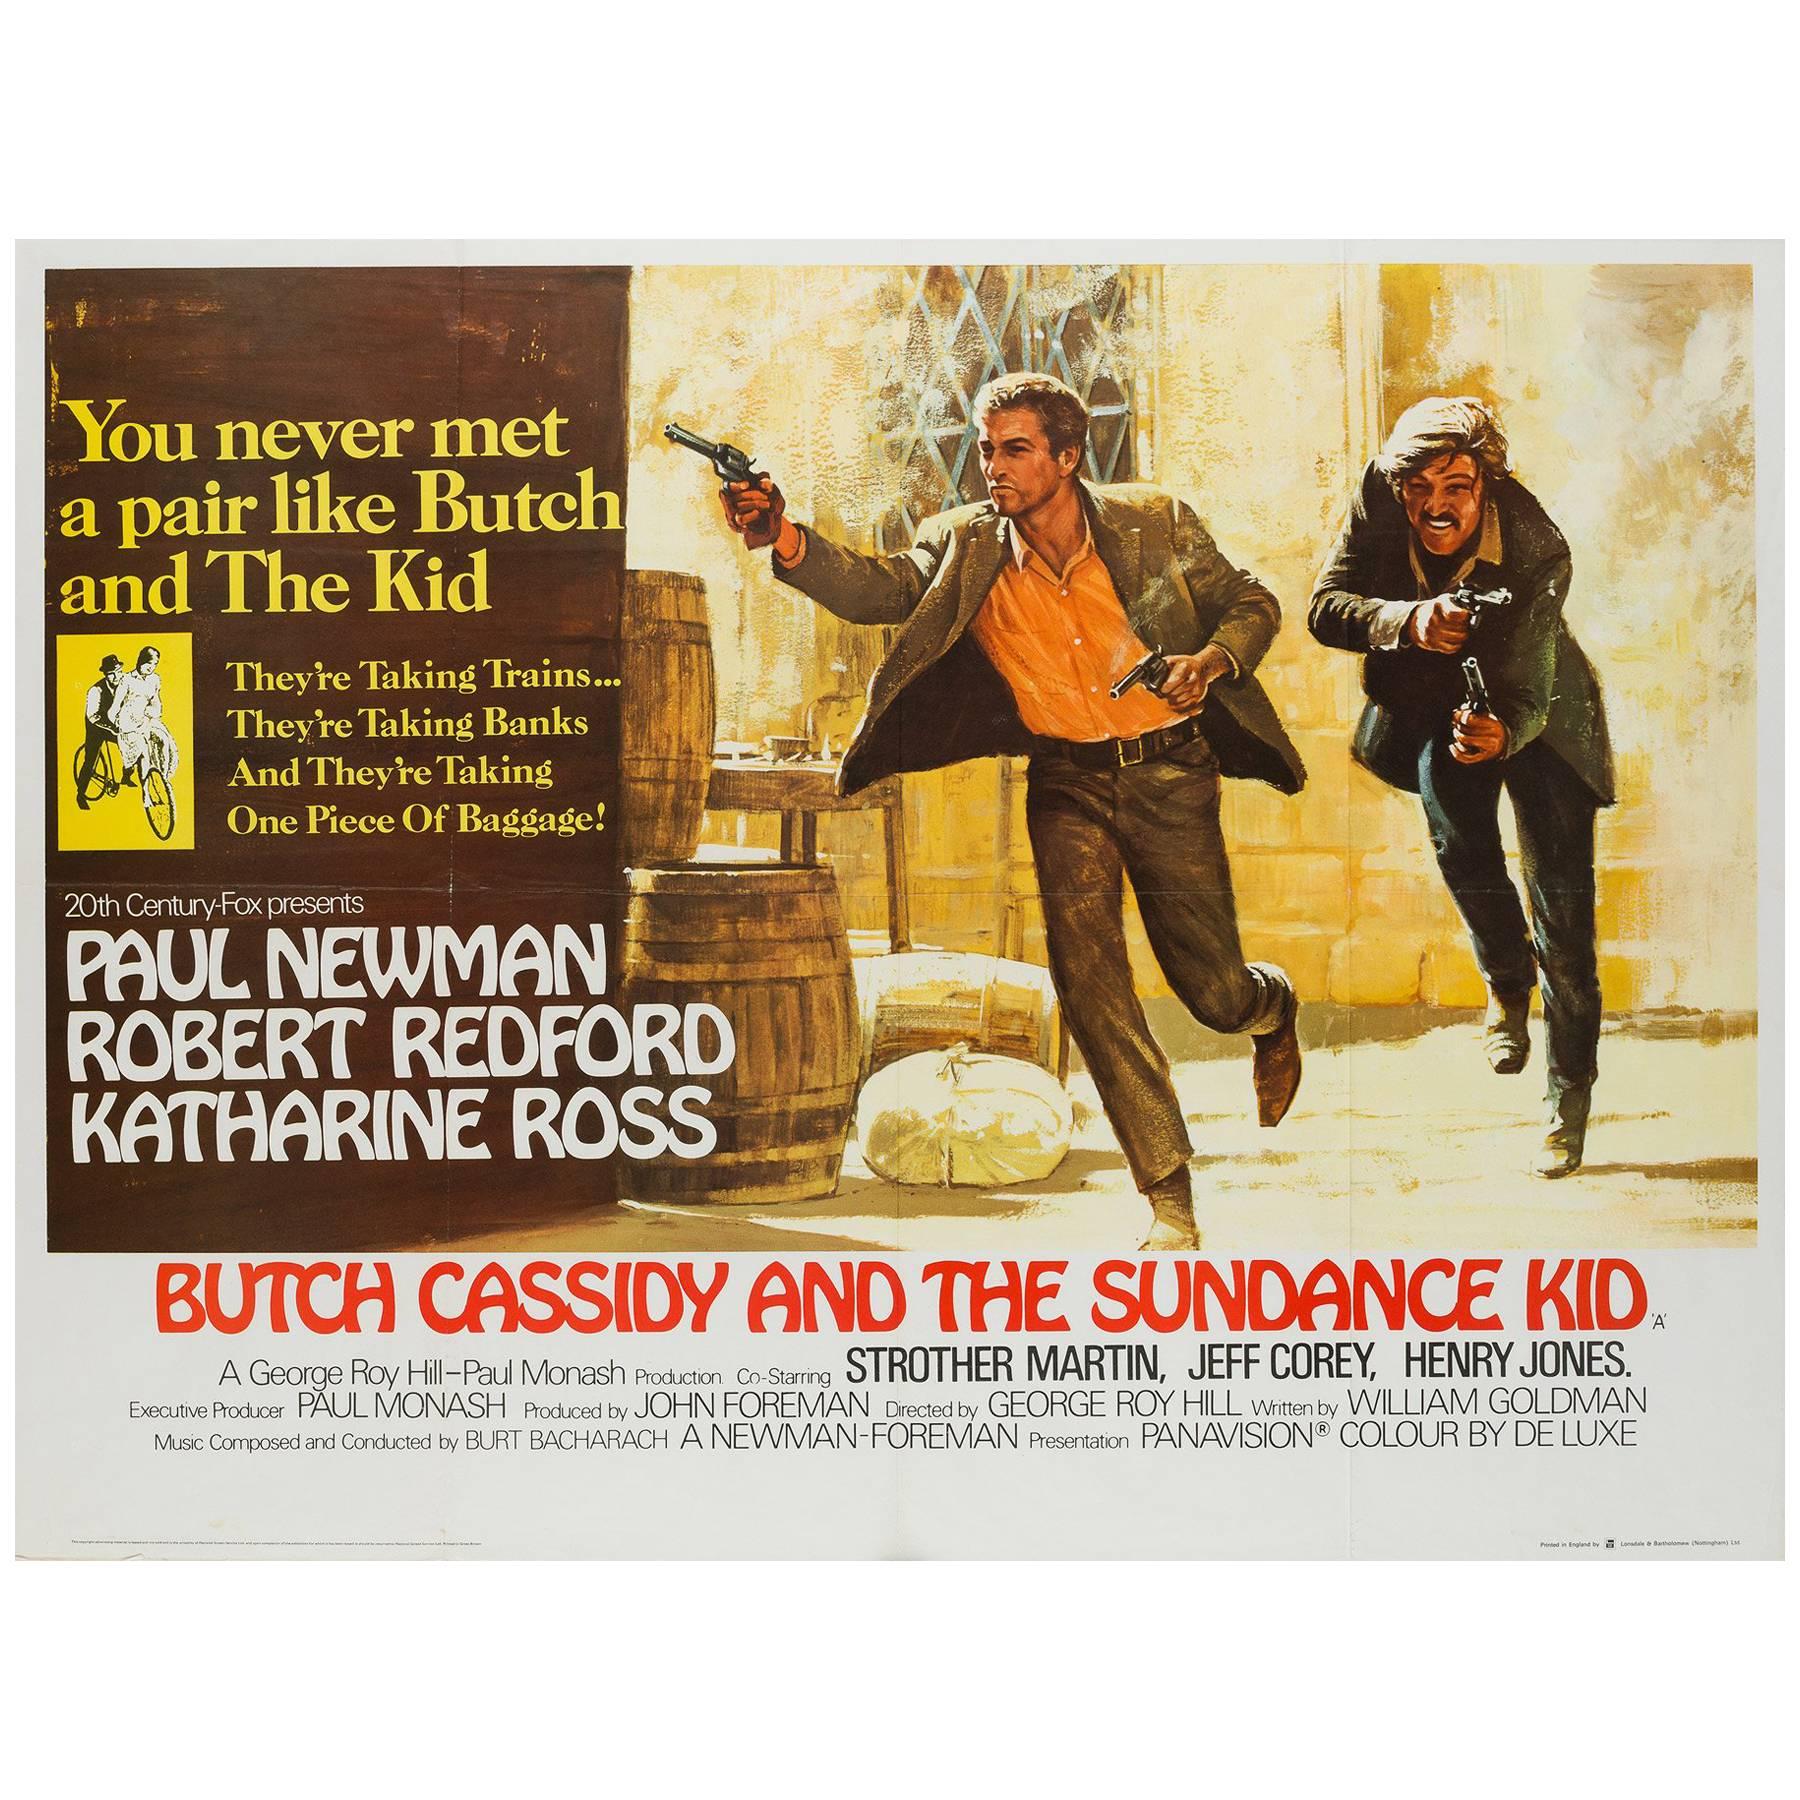 Butch Cassidy and the Sundance Kid UK Film Poster, Art by Tom Beauvais, 1969